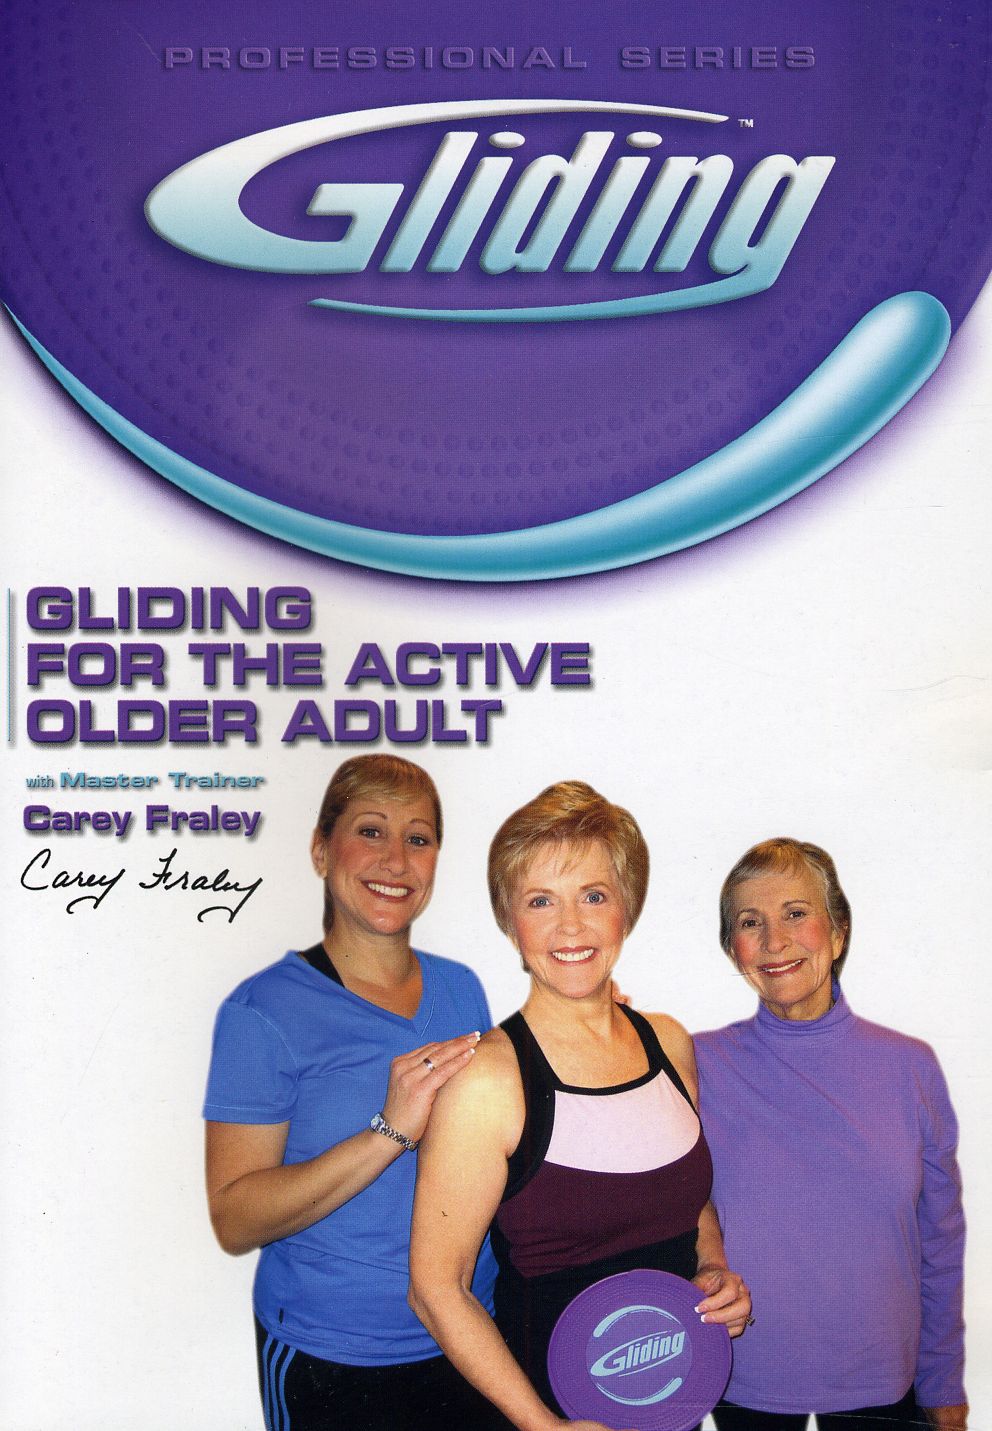 GLIDING: FOR THE ACTIVE OLDER ADULT